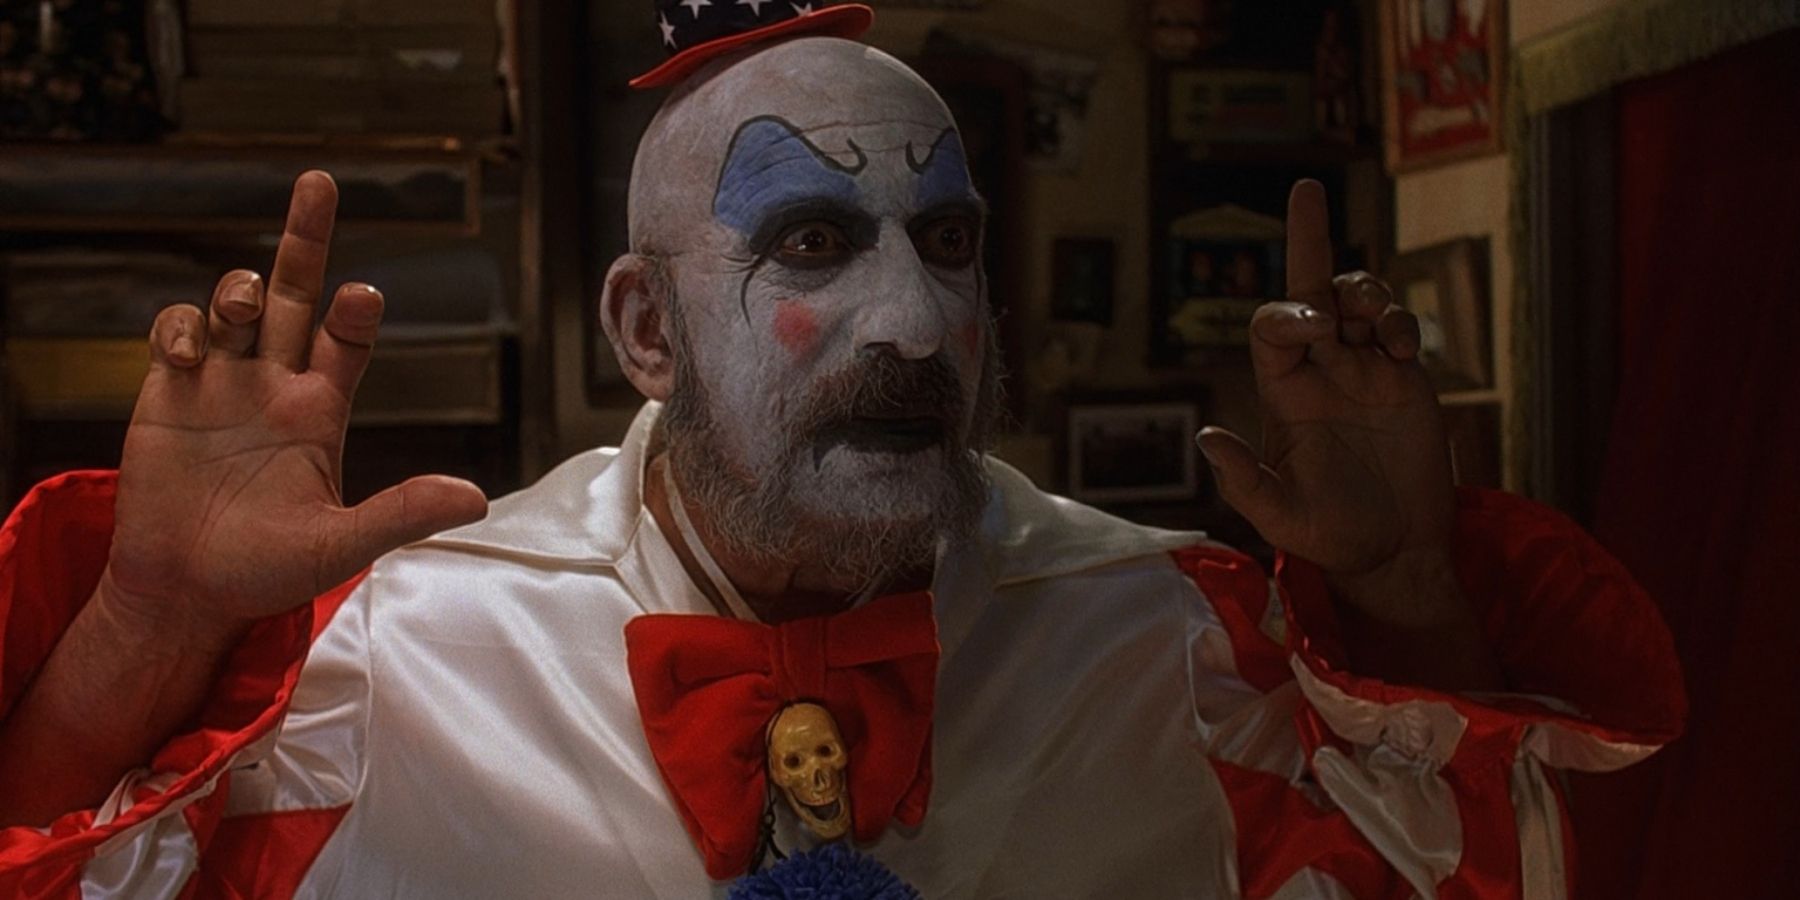 A man with clown makeup in House Of 1000 Corpses